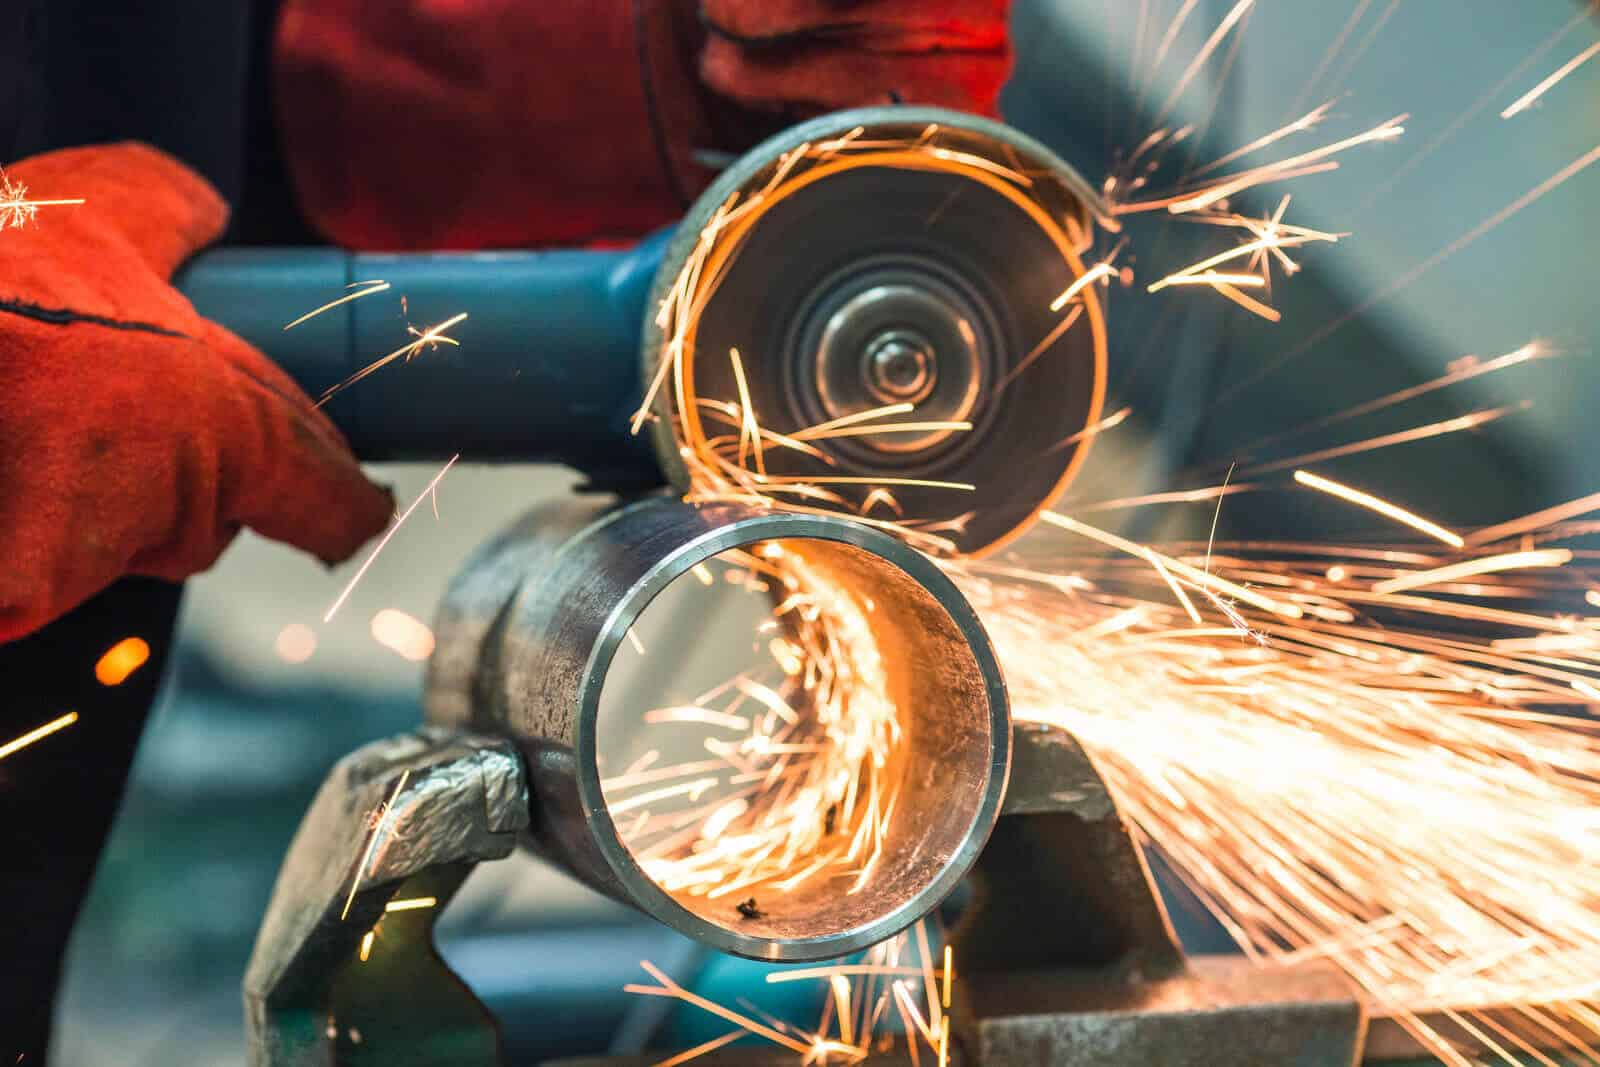 Angle Grinder: How to Use It and What Can It Cut